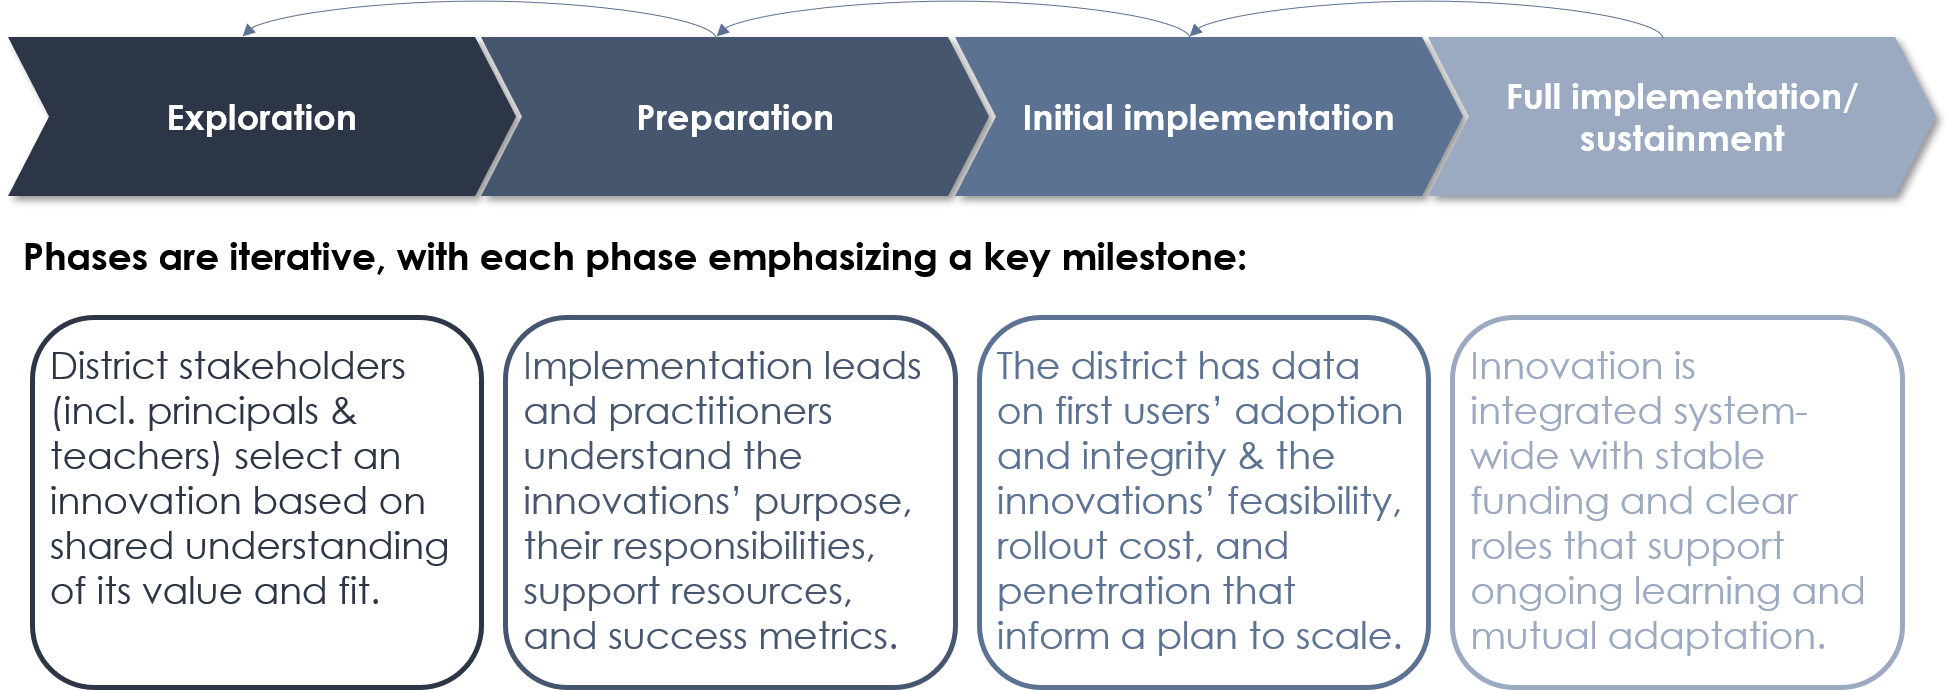 Figure 4: Implementation research suggests a dynamic four-phased rollout process